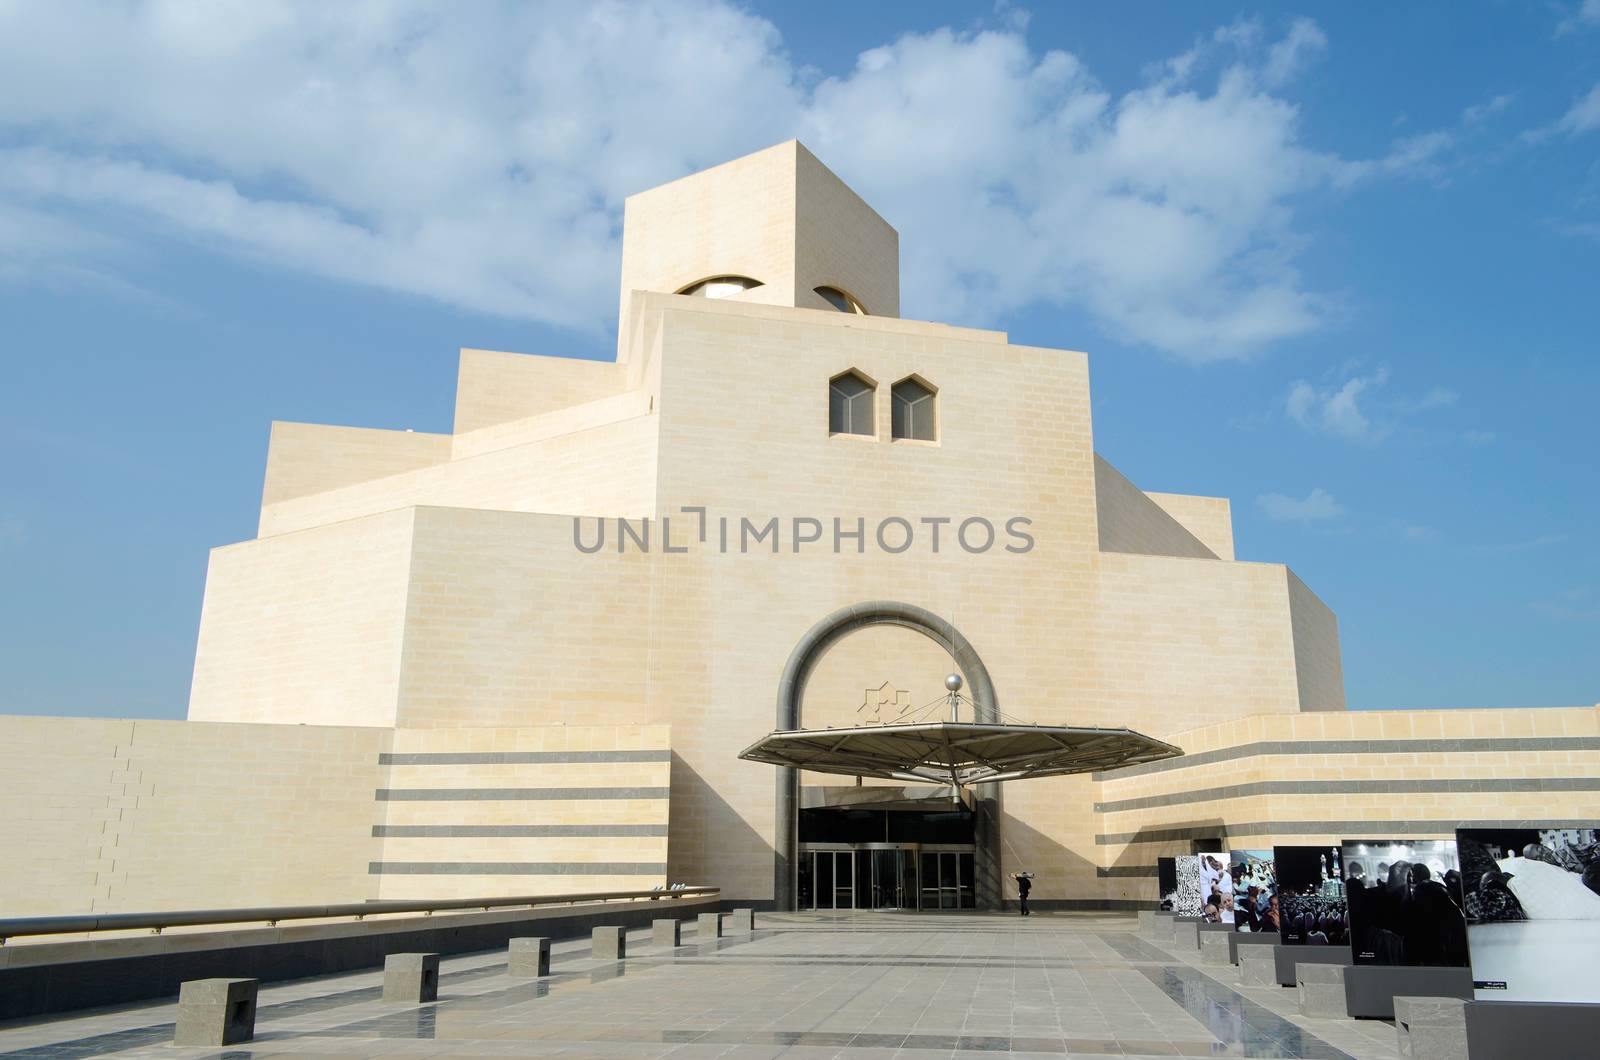 Doha, Qatar – January 12, 2014: The modern architecture of the Museum of Islamic Arts (MIA) in the city center of Doha, the capital of the Arabian Gulf country Qatar on January 12, 2014.